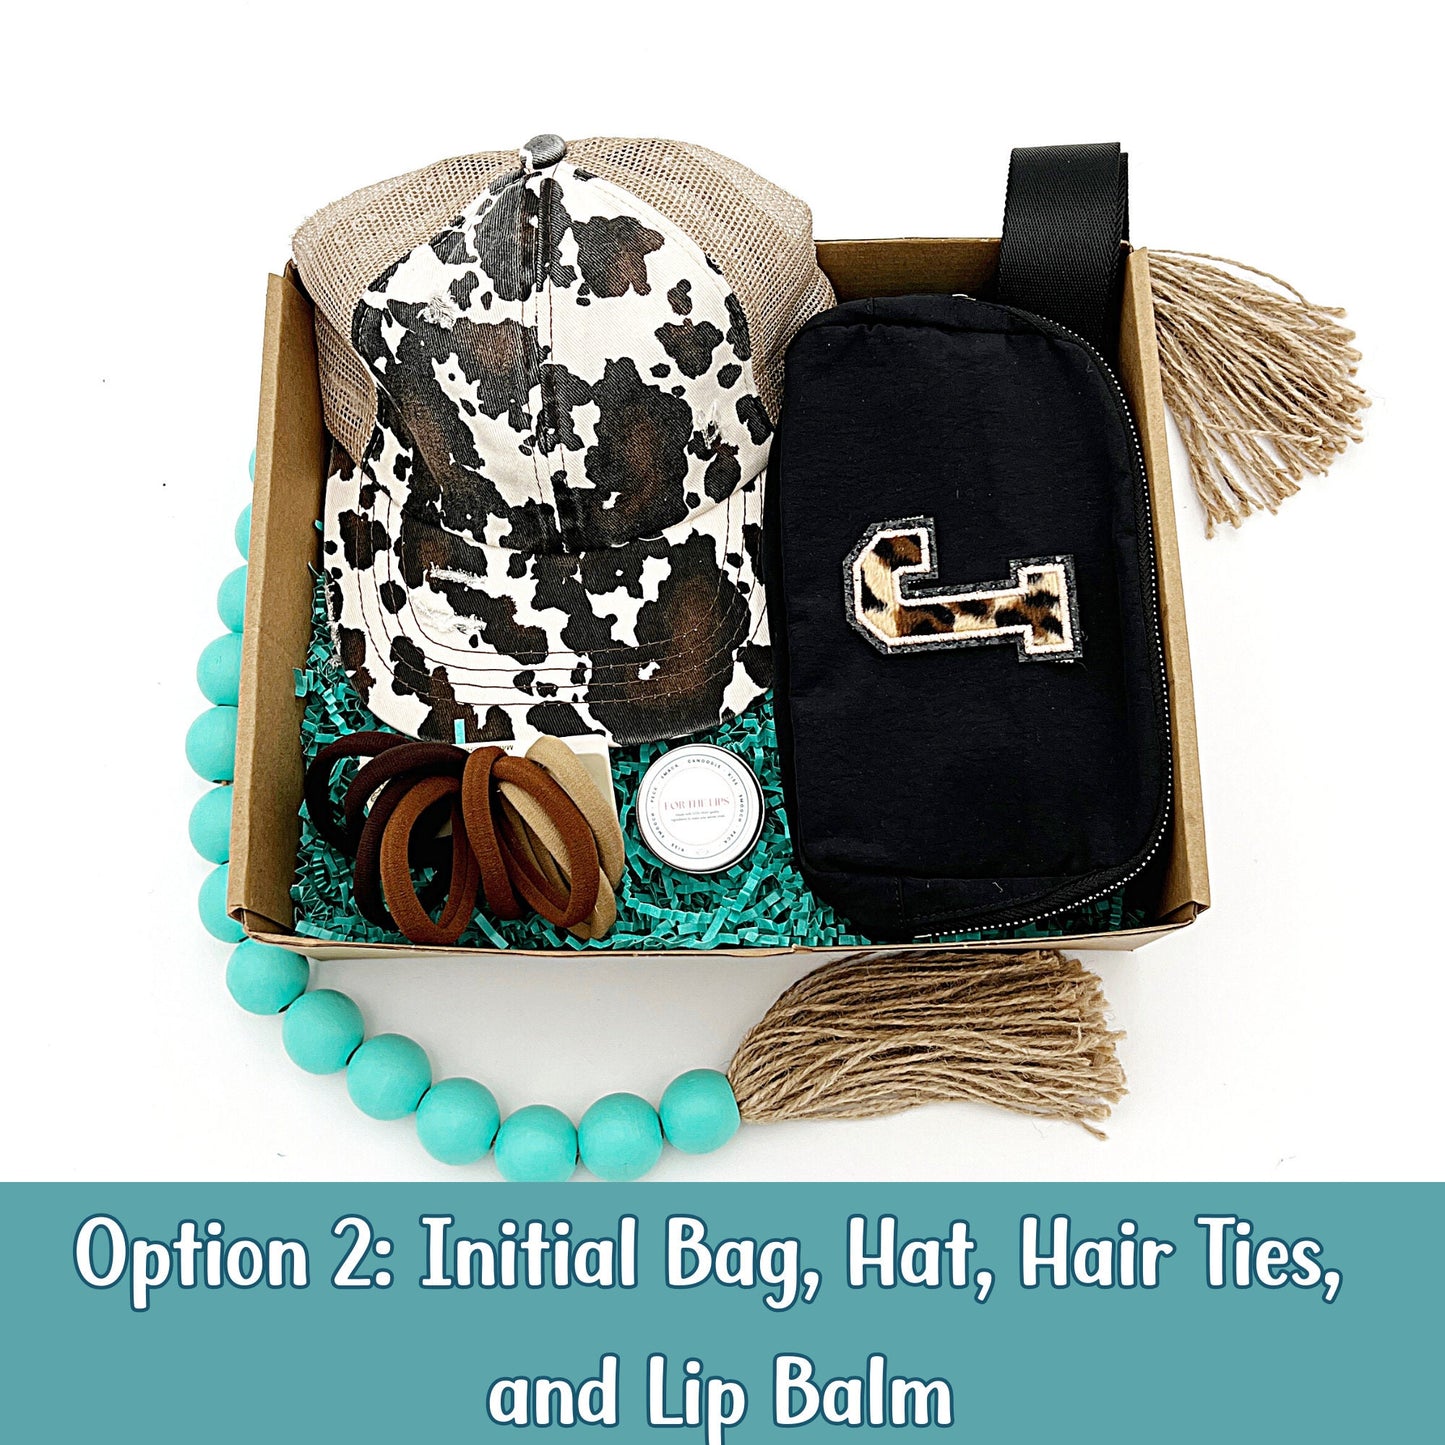 Gift box for her with a cow print hat, personalized fanny pack, hair ties, and lip balm.